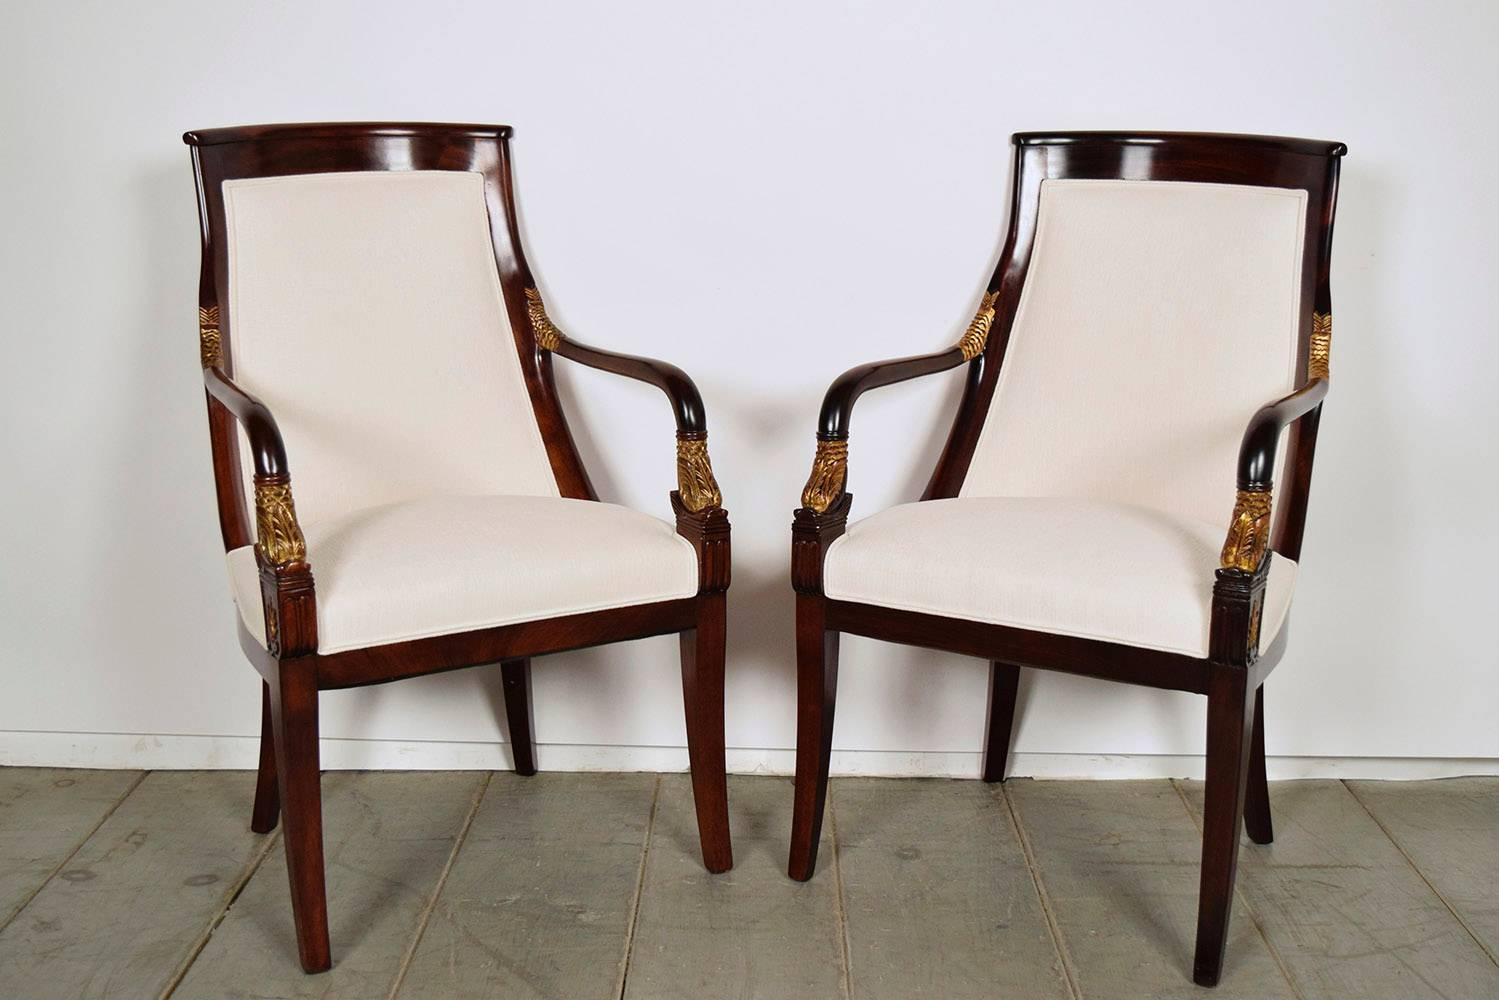 European Set of Eight Empire-Style Mahogany Dining Chairs